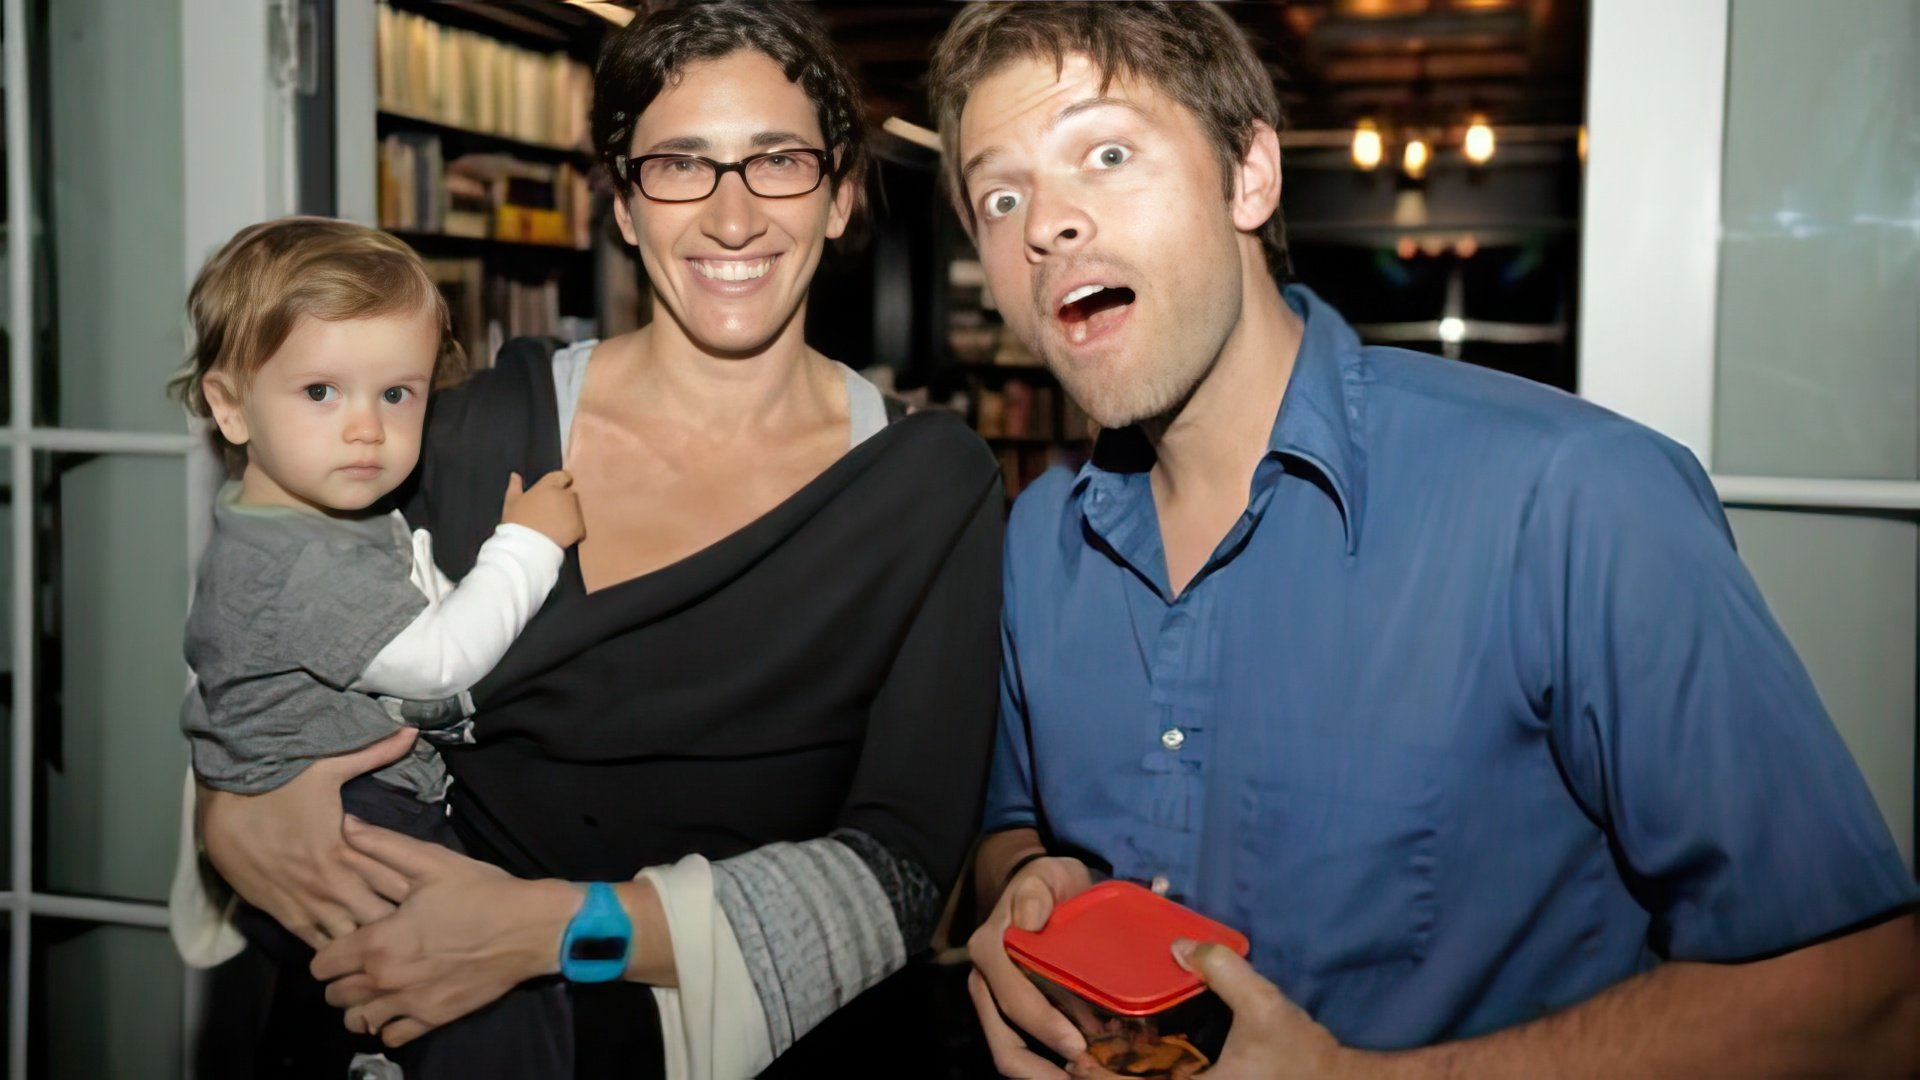 Misha Collins with his wife and son